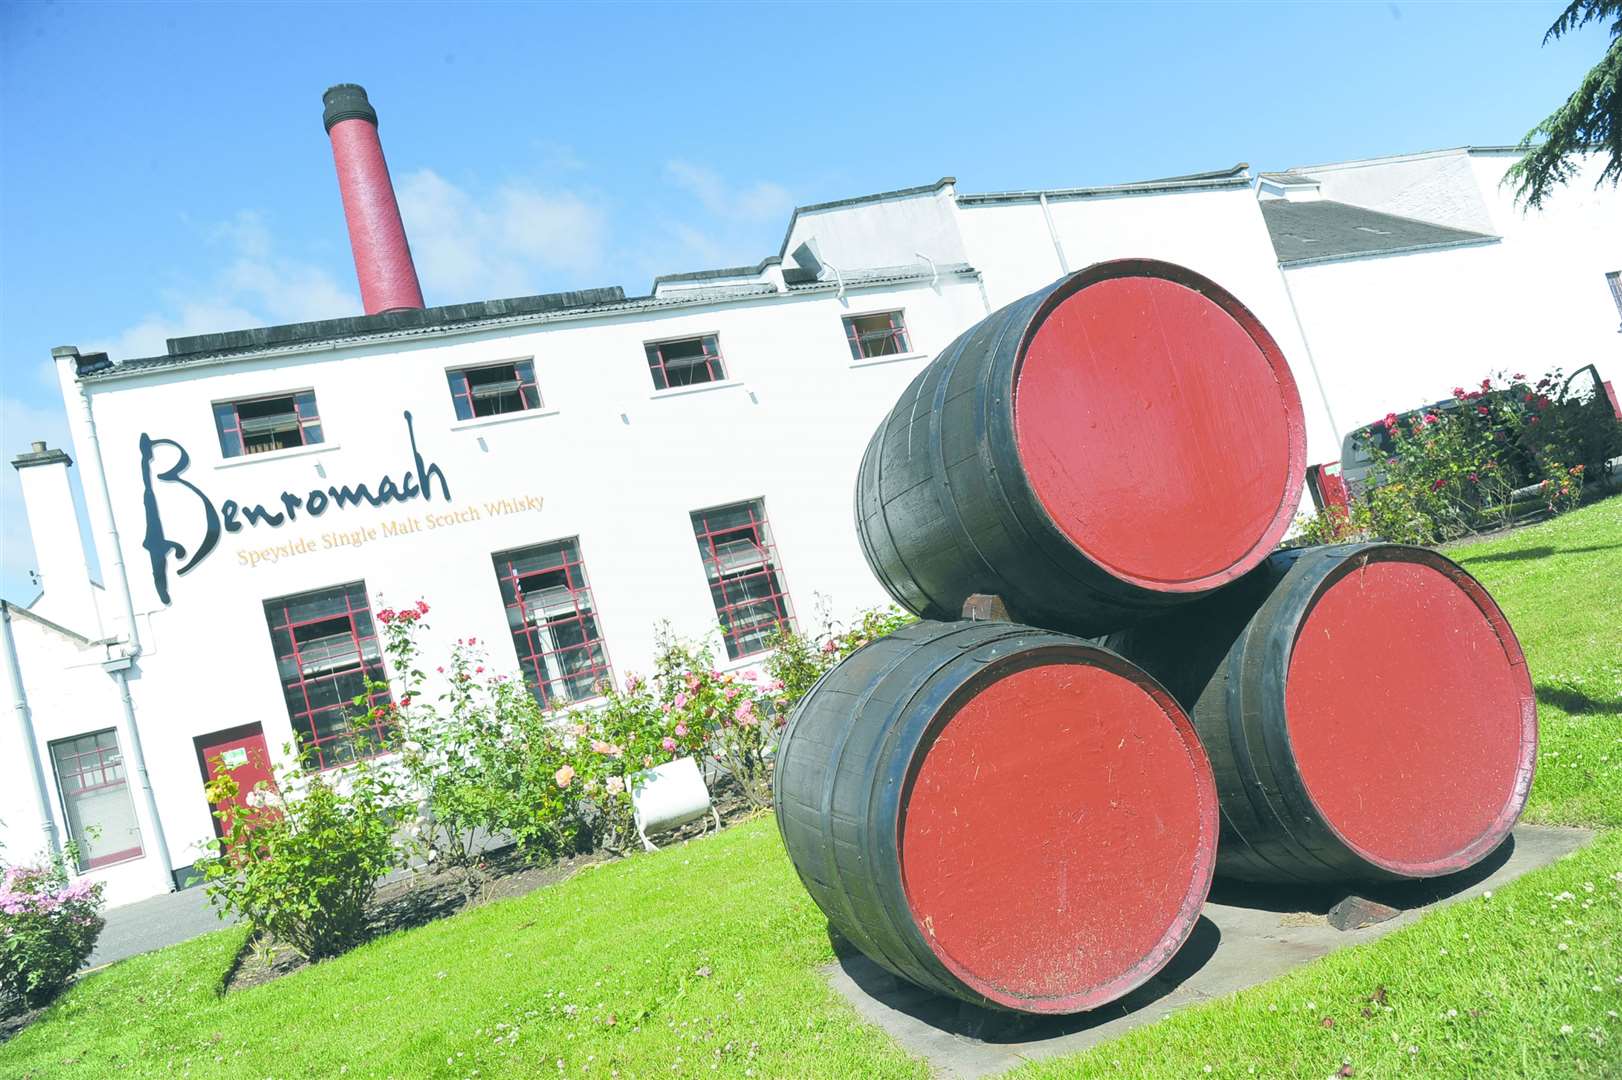 Benromach distillery in Forres